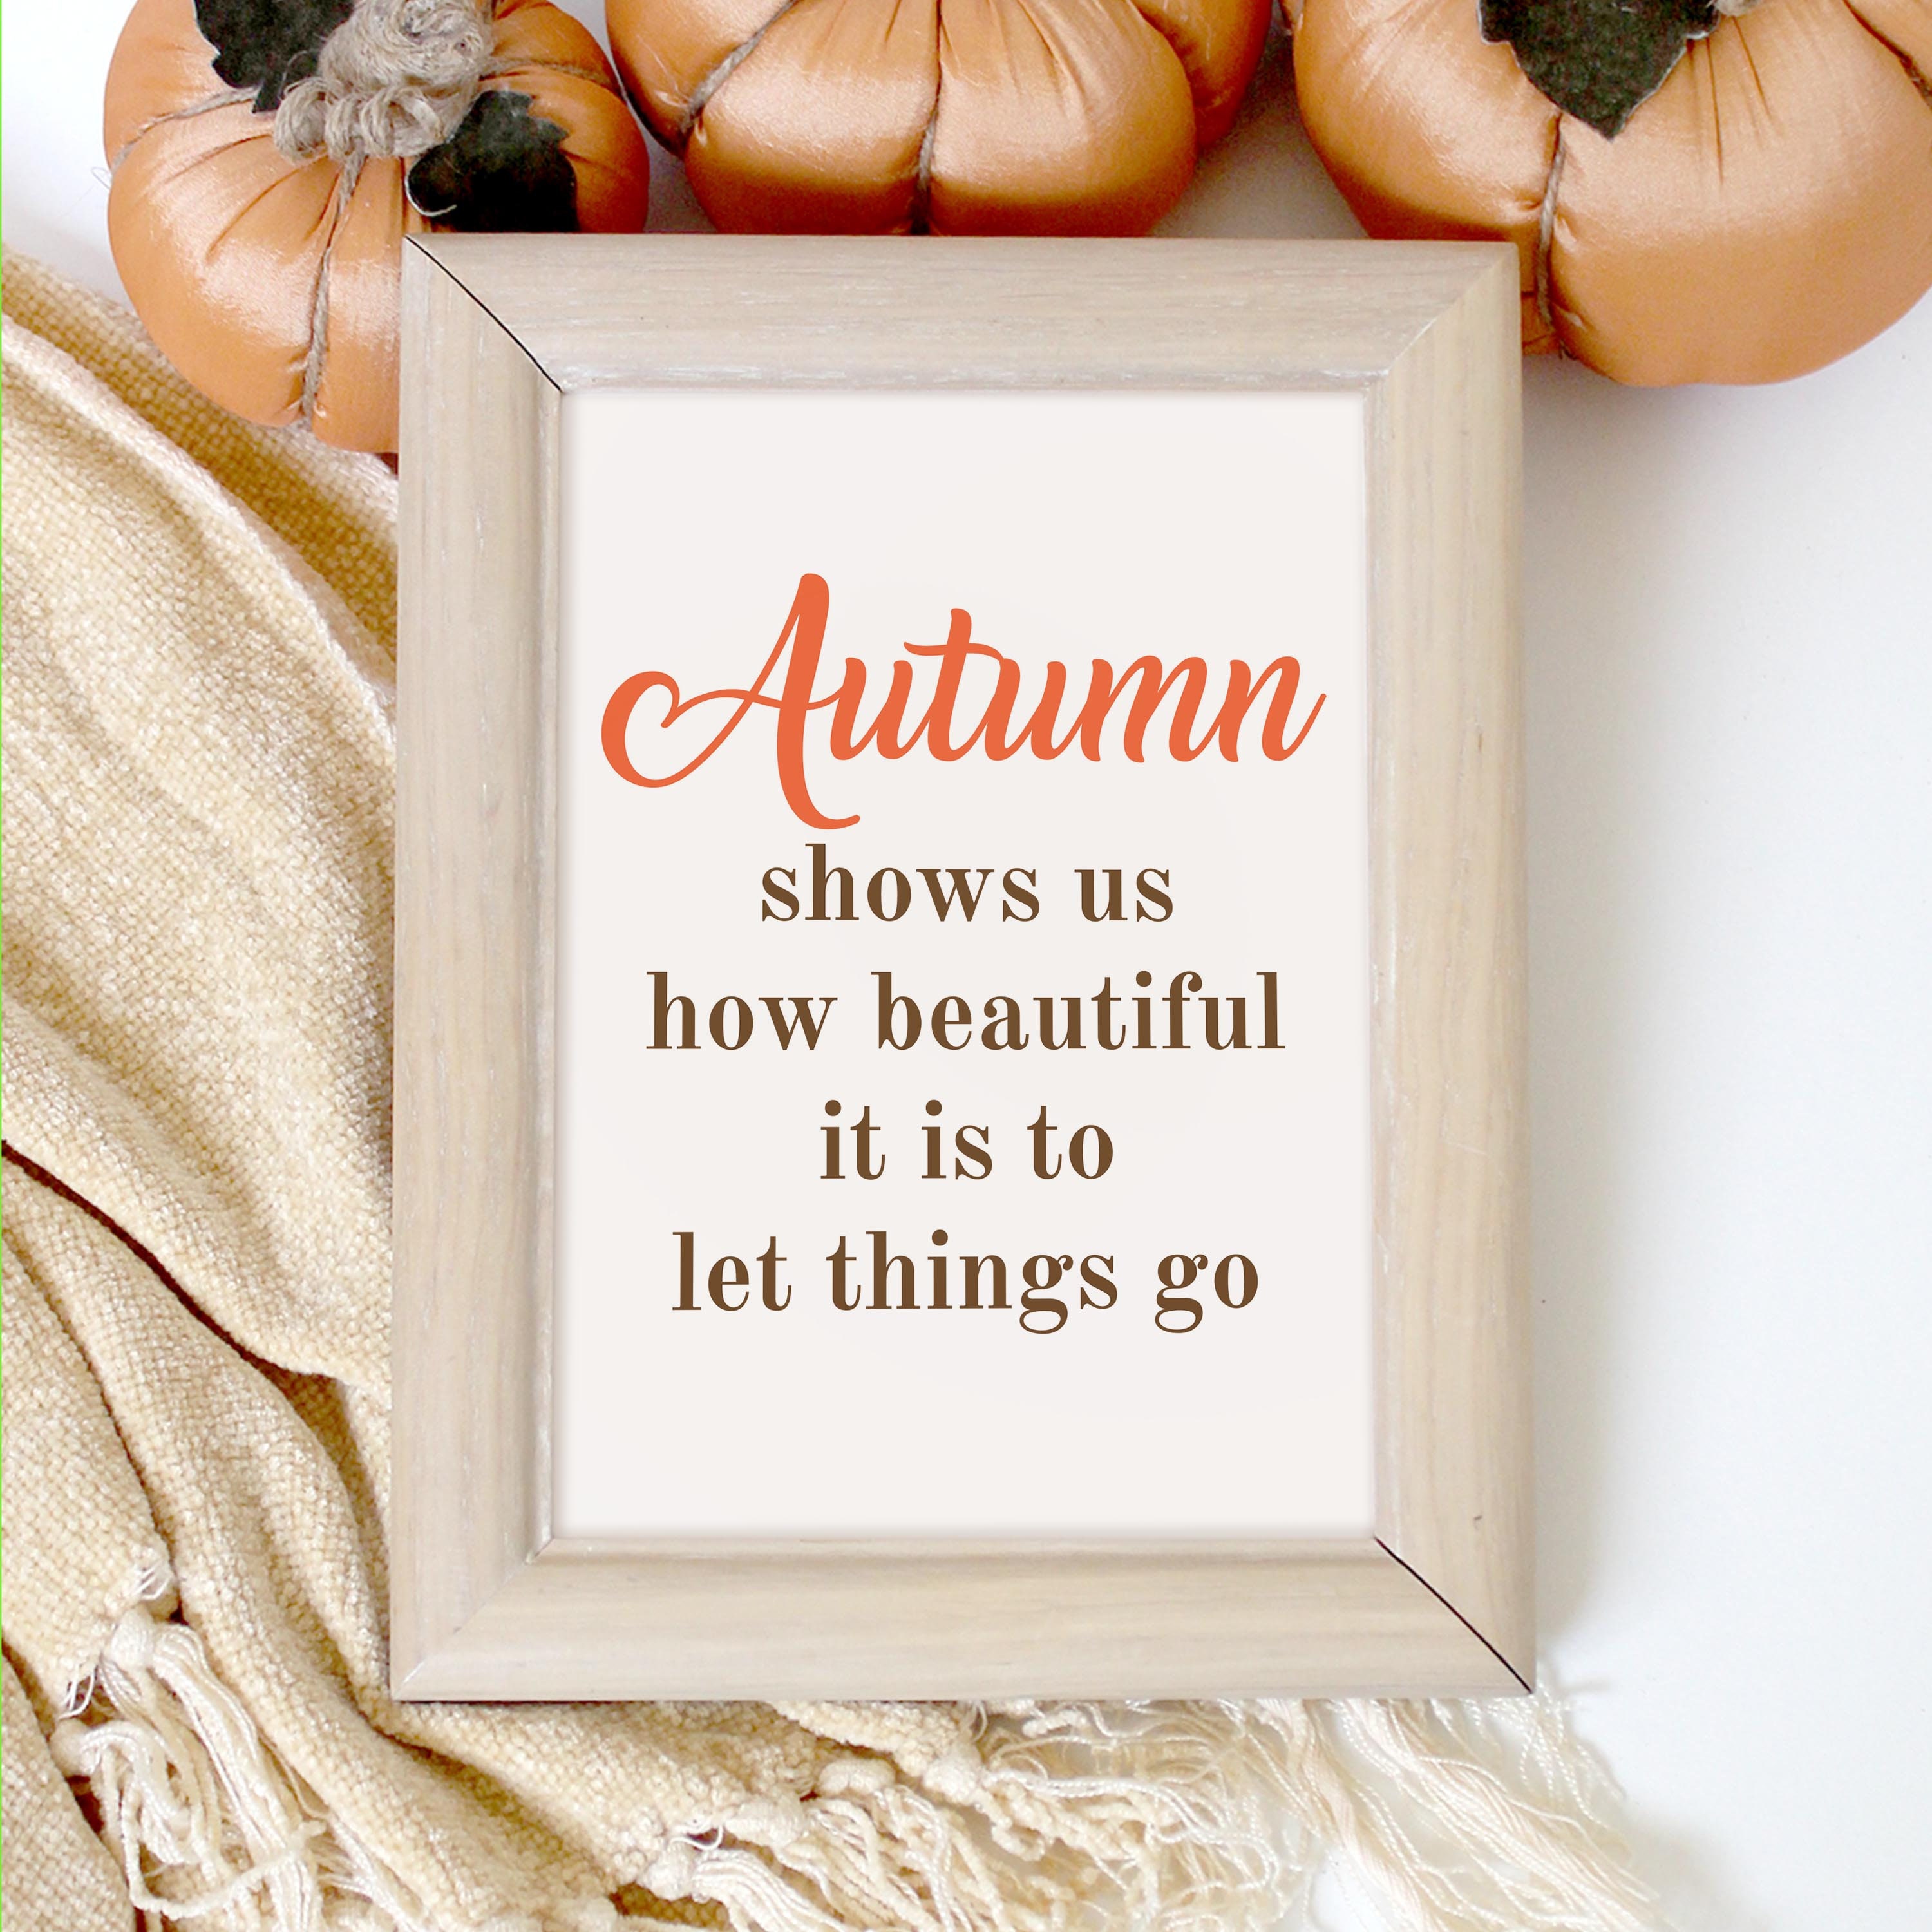 Printable inspirational fall home decor sign. Autumn shows us | Etsy